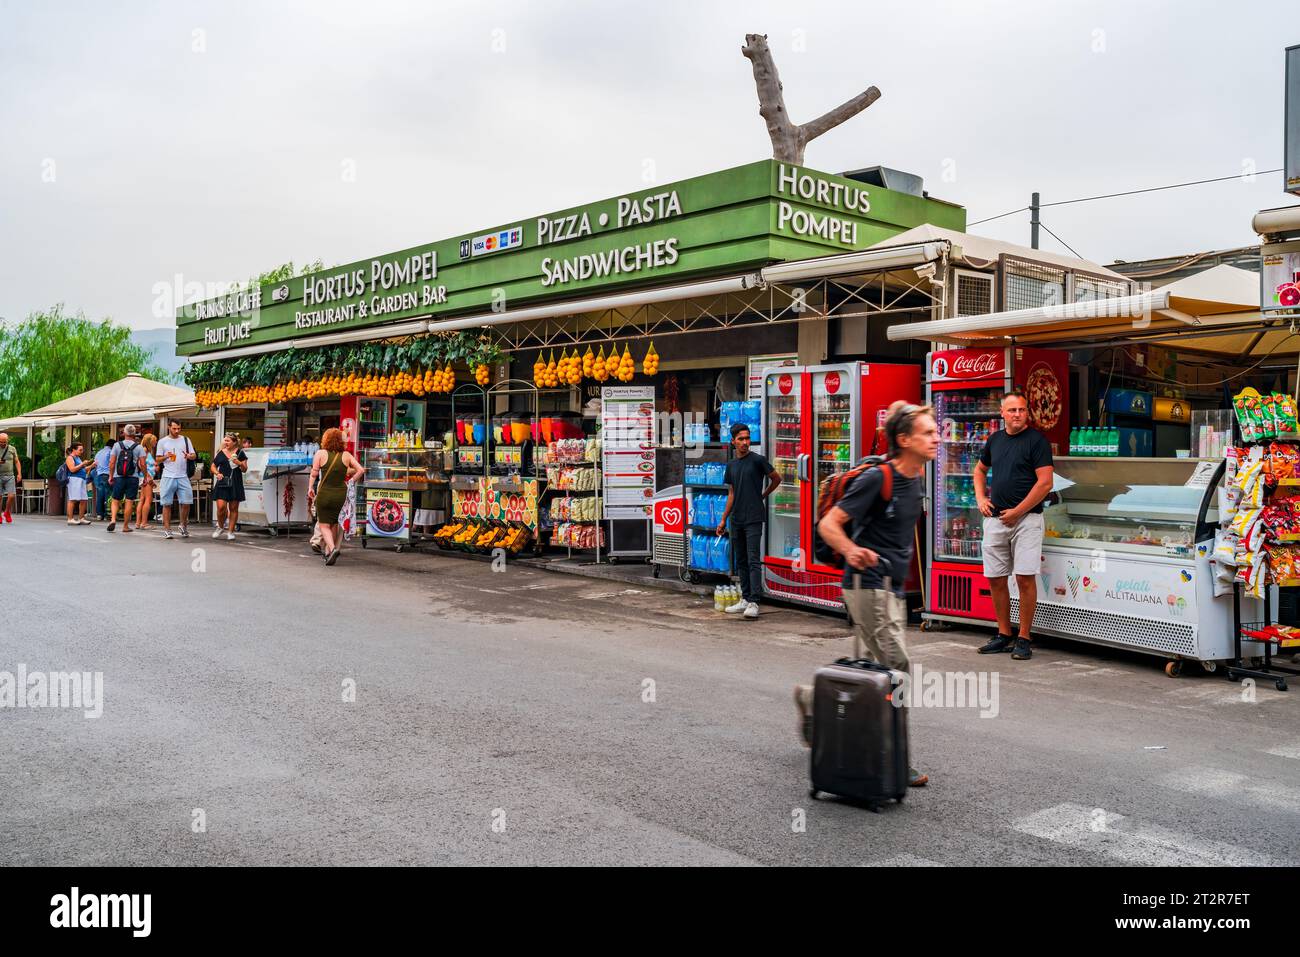 POMPEI, ITALY - SEPTEMBER 20 2023: Food market outside the site of the excavated ancient Roman city of Pompei destroyed in 79 AD by the eruption of th Stock Photo